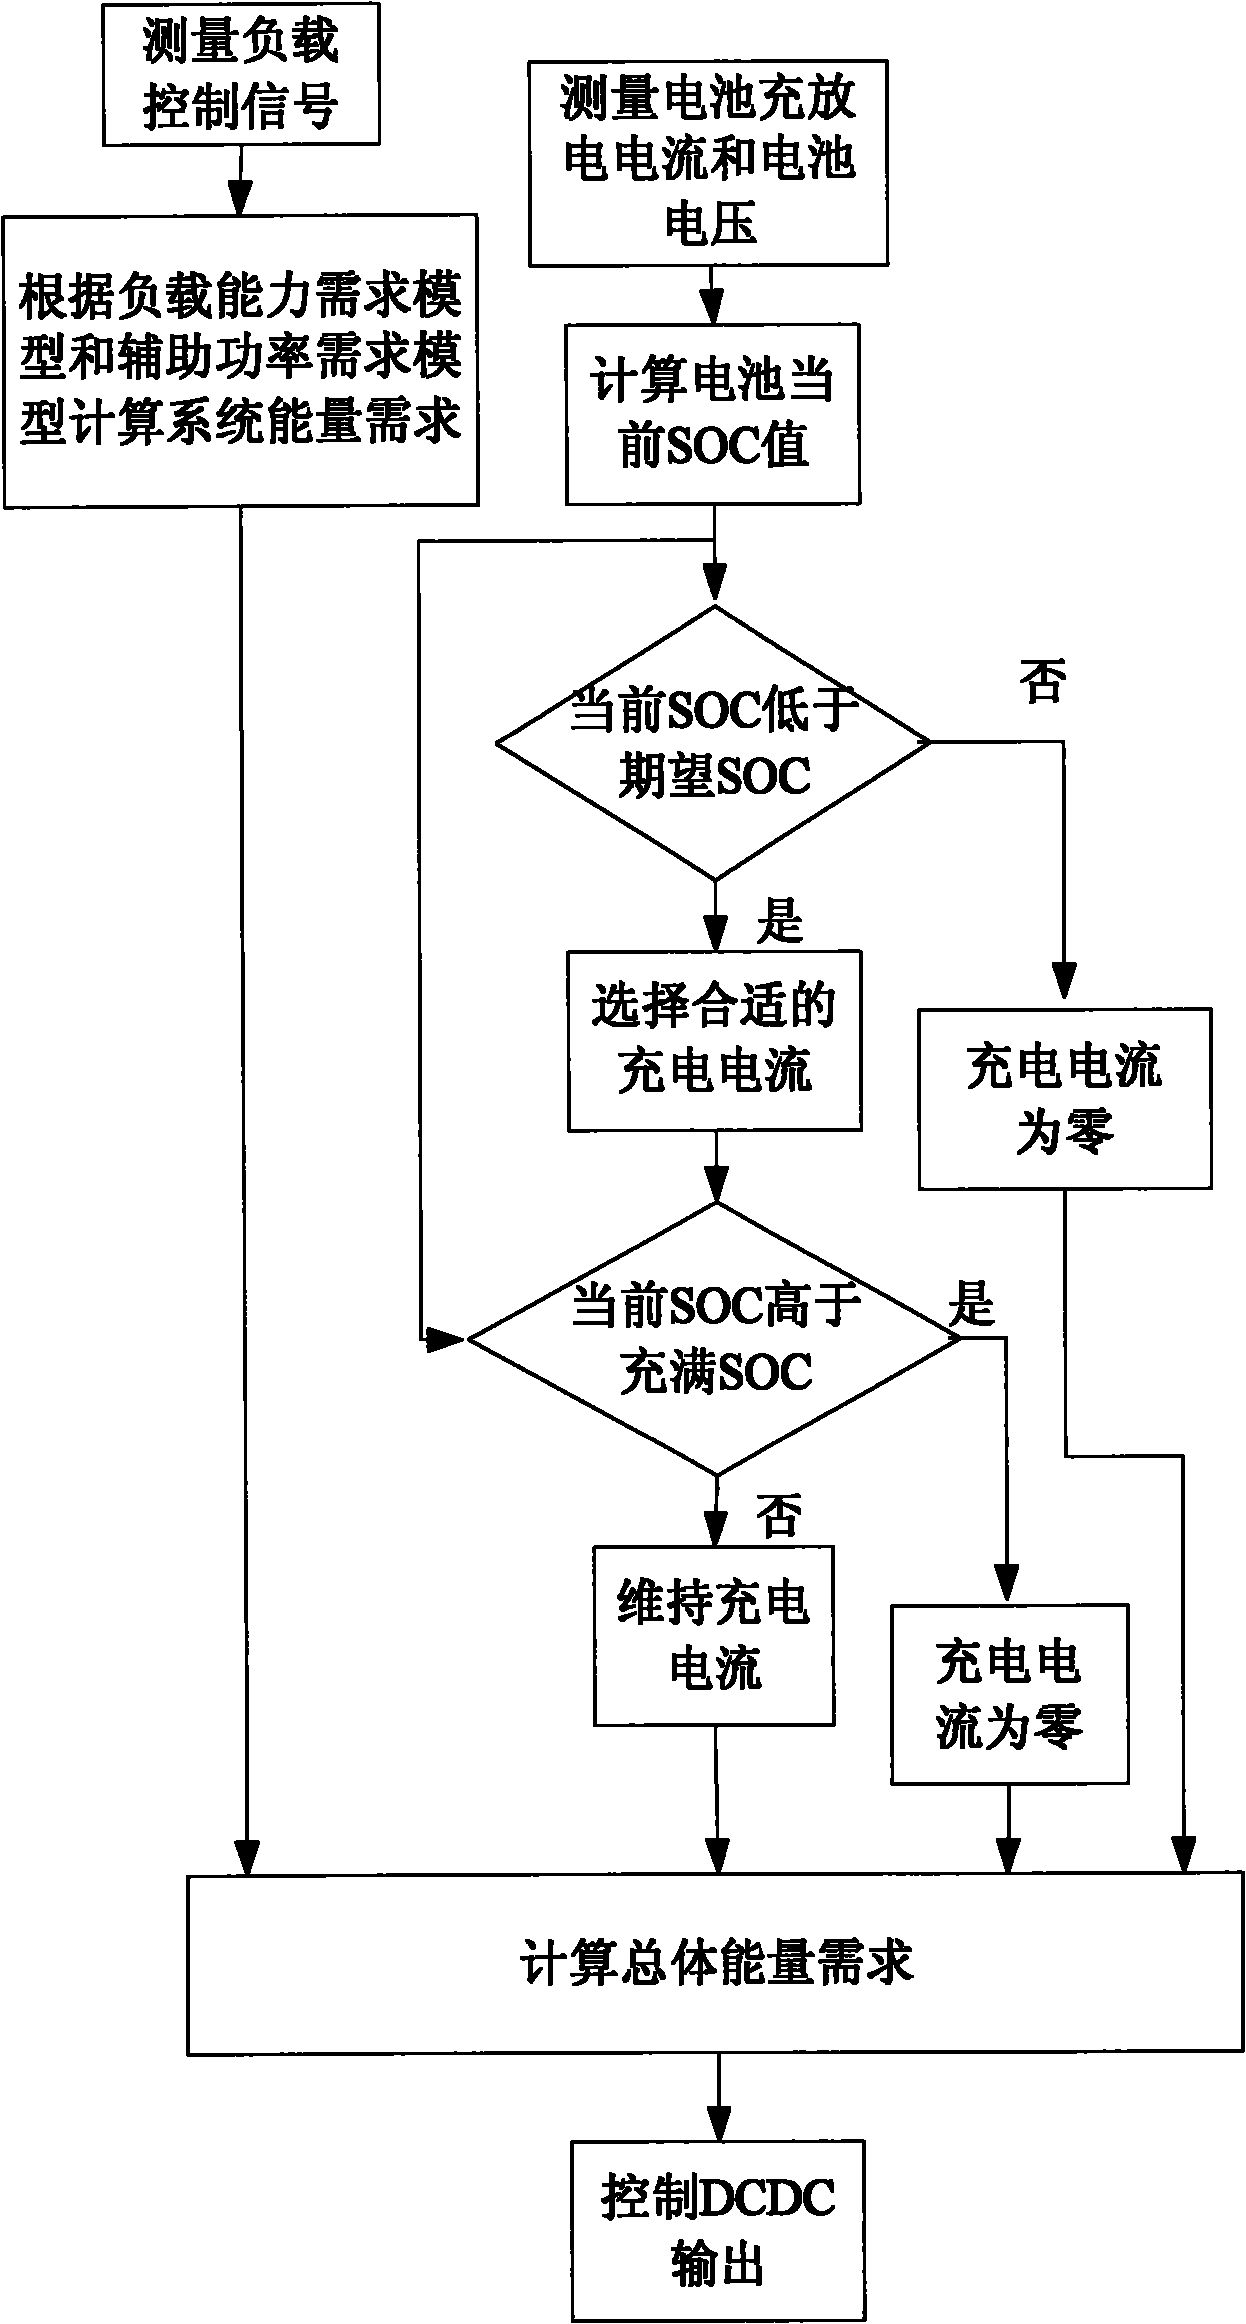 Energy management system of mixed power device based on fuel cell